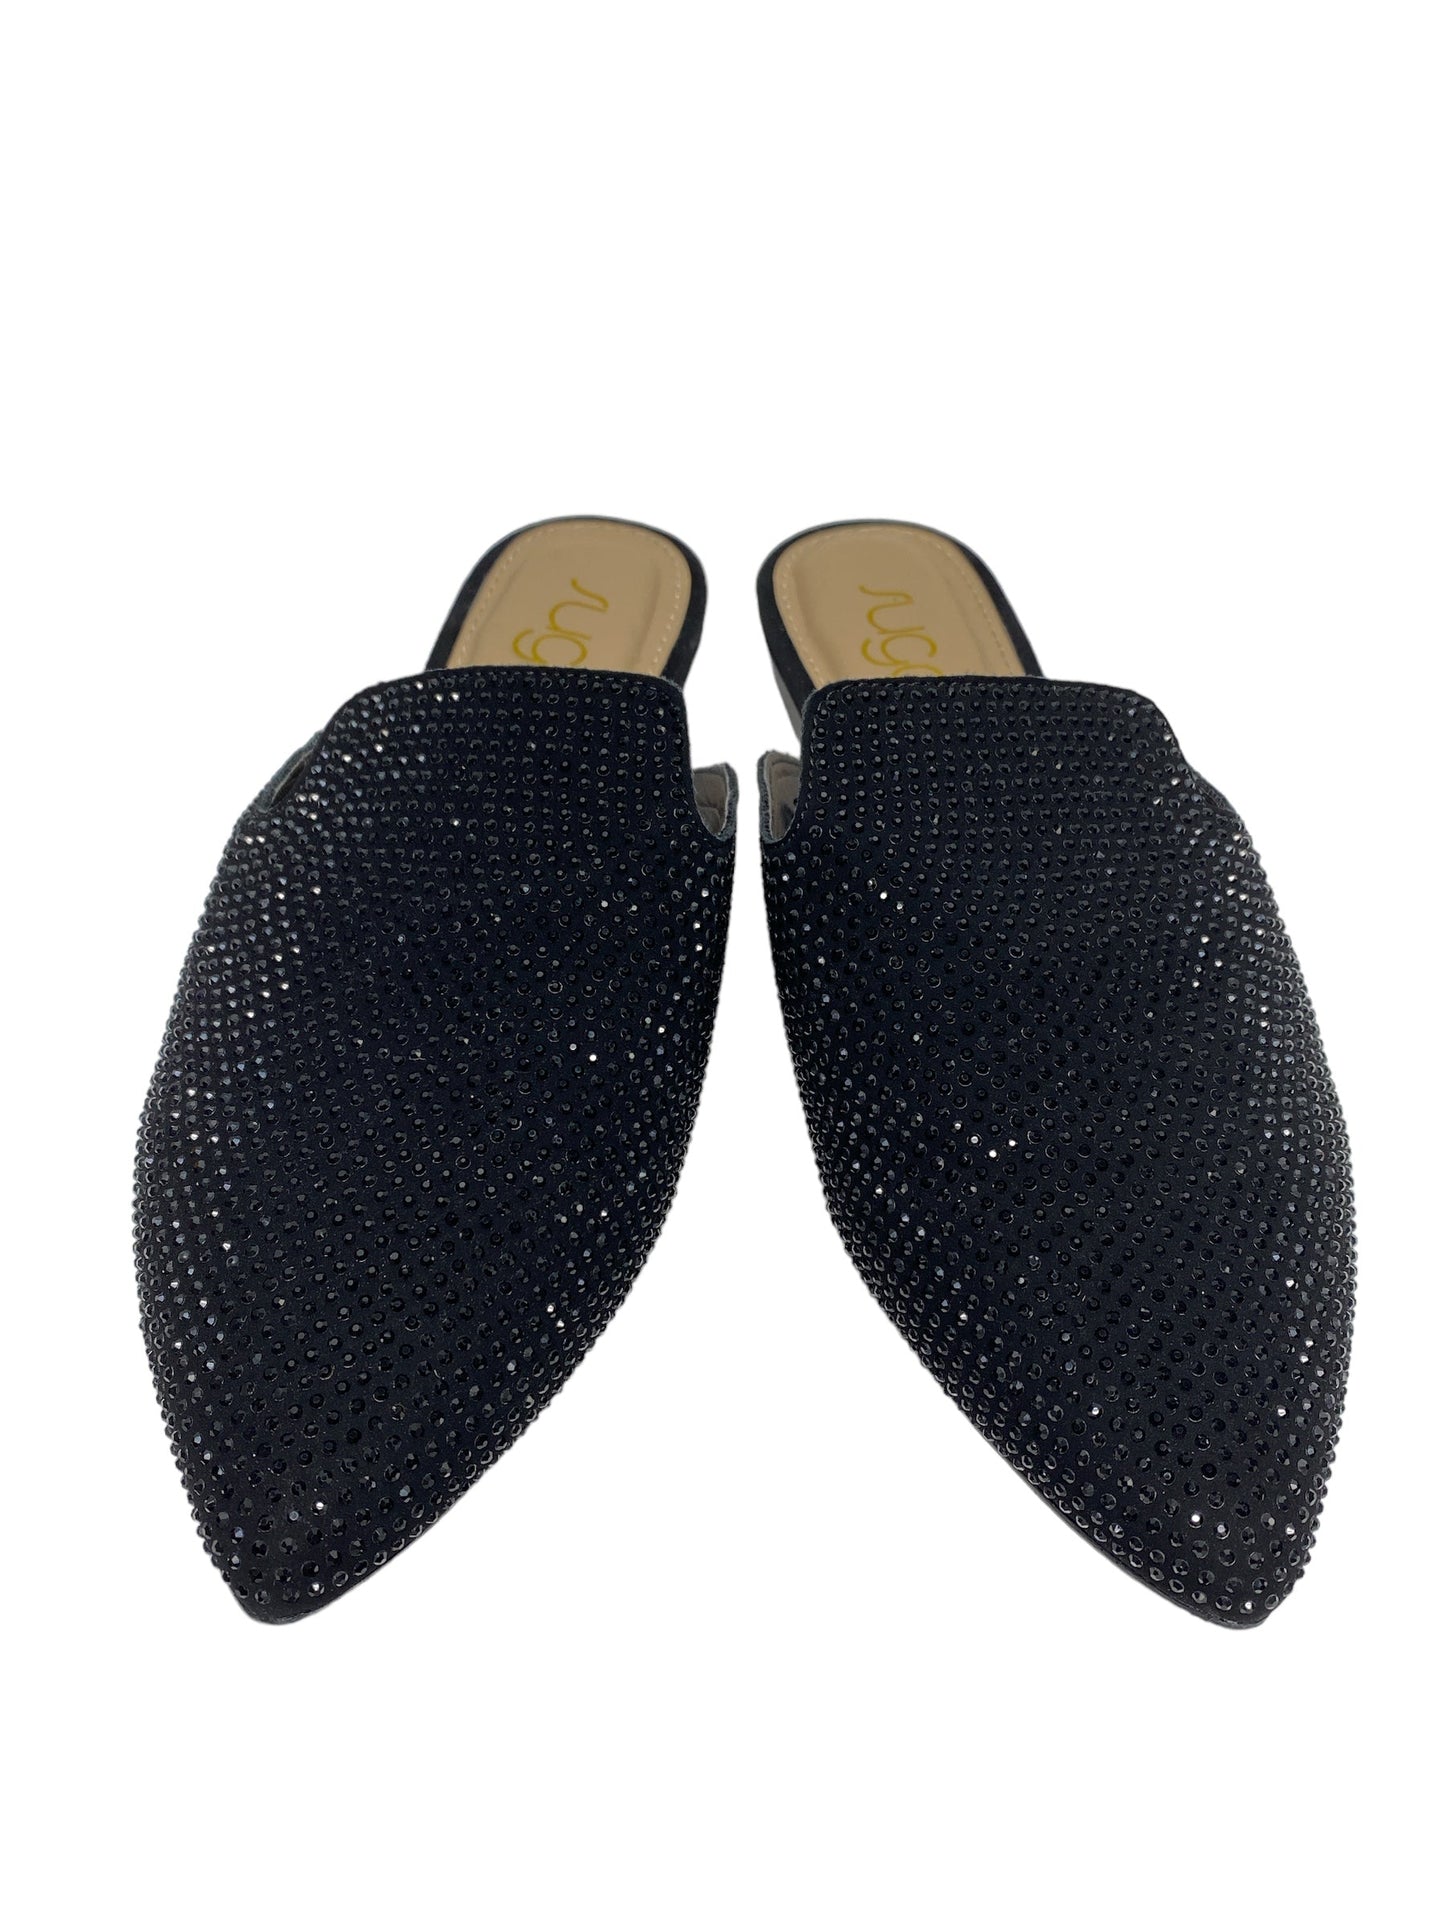 Shoes Flats By Sugar  Size: 7.5